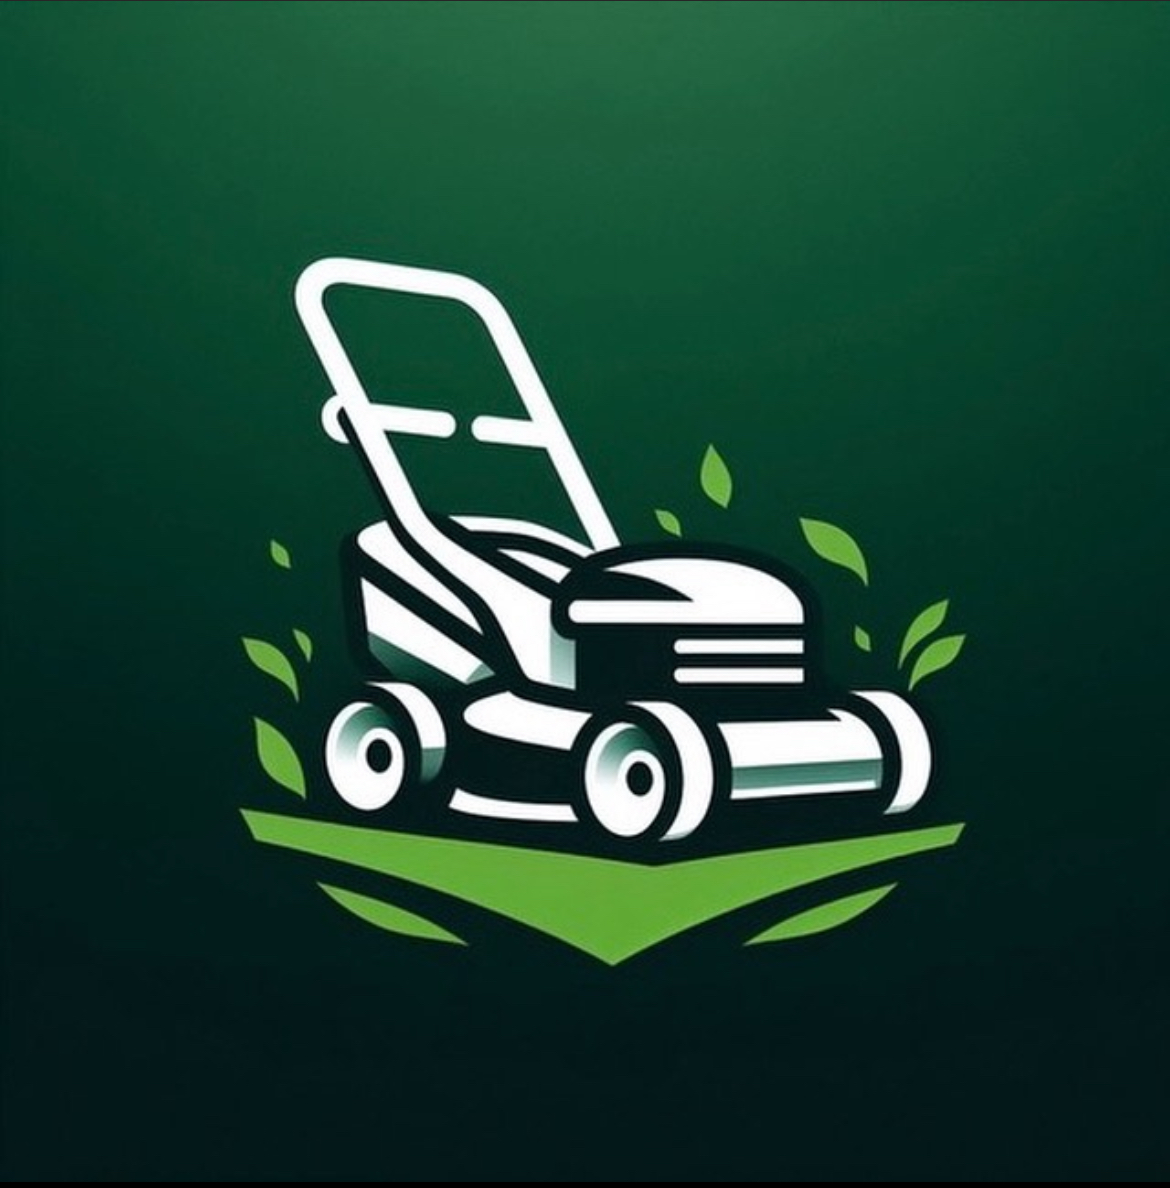 TGW Landscaping Business striking logo encourages customers to support their business.